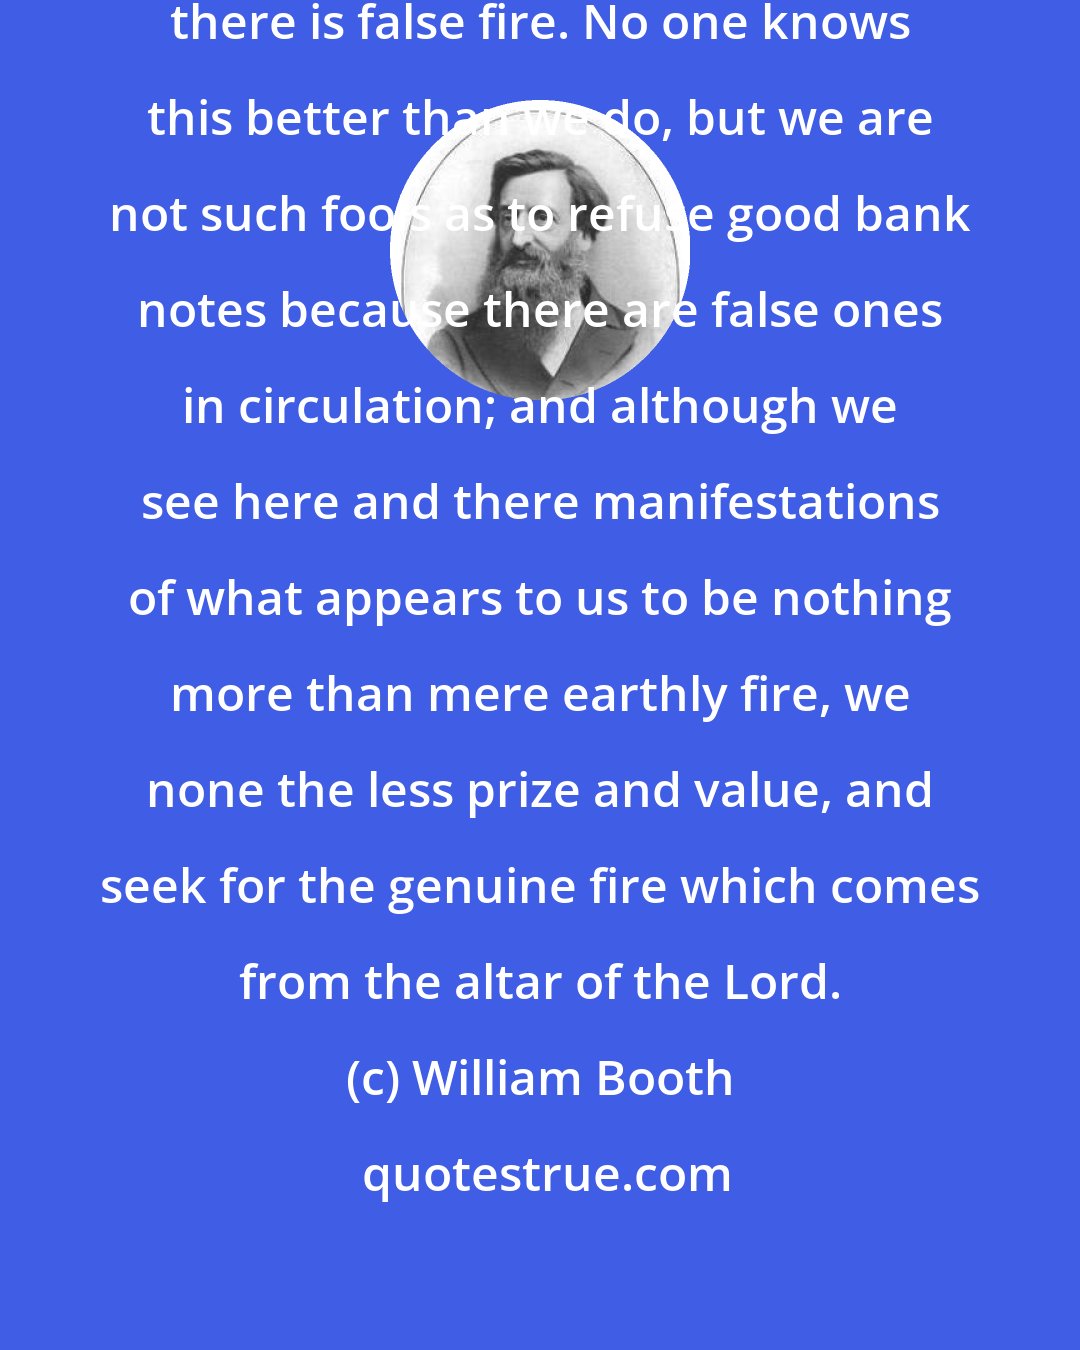 William Booth: There are different kinds of fire; there is false fire. No one knows this better than we do, but we are not such fools as to refuse good bank notes because there are false ones in circulation; and although we see here and there manifestations of what appears to us to be nothing more than mere earthly fire, we none the less prize and value, and seek for the genuine fire which comes from the altar of the Lord.